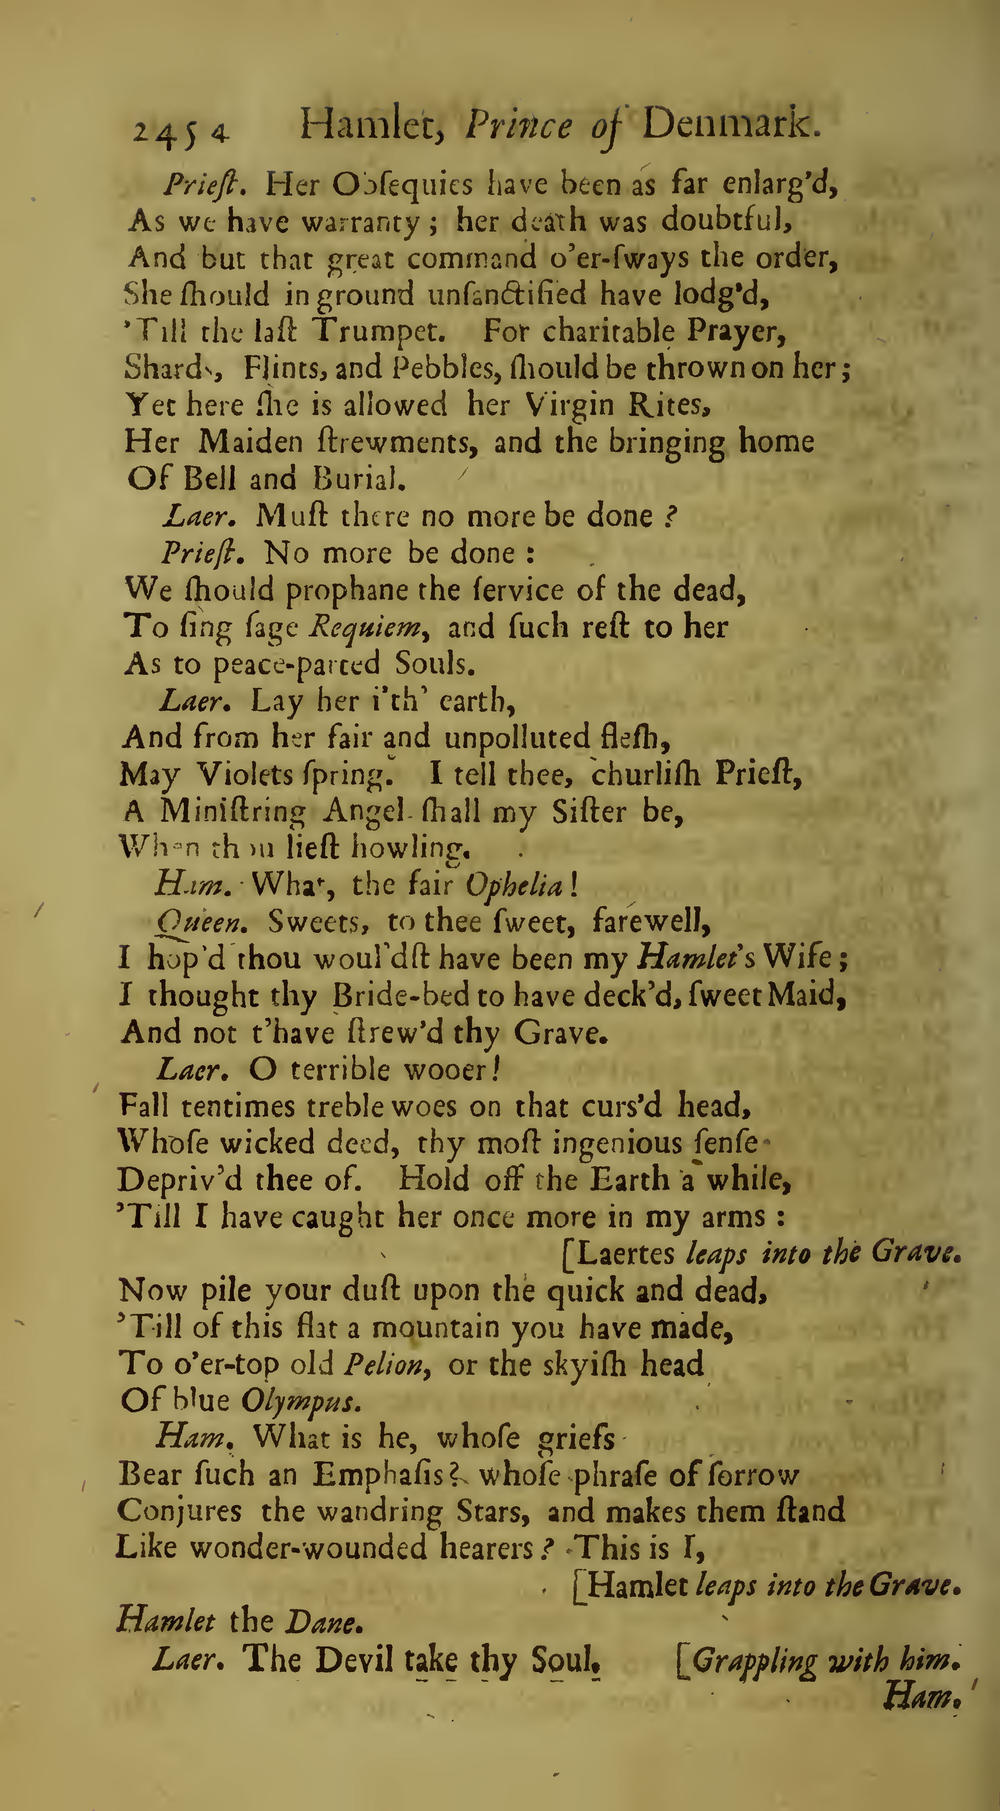 Image of page 394